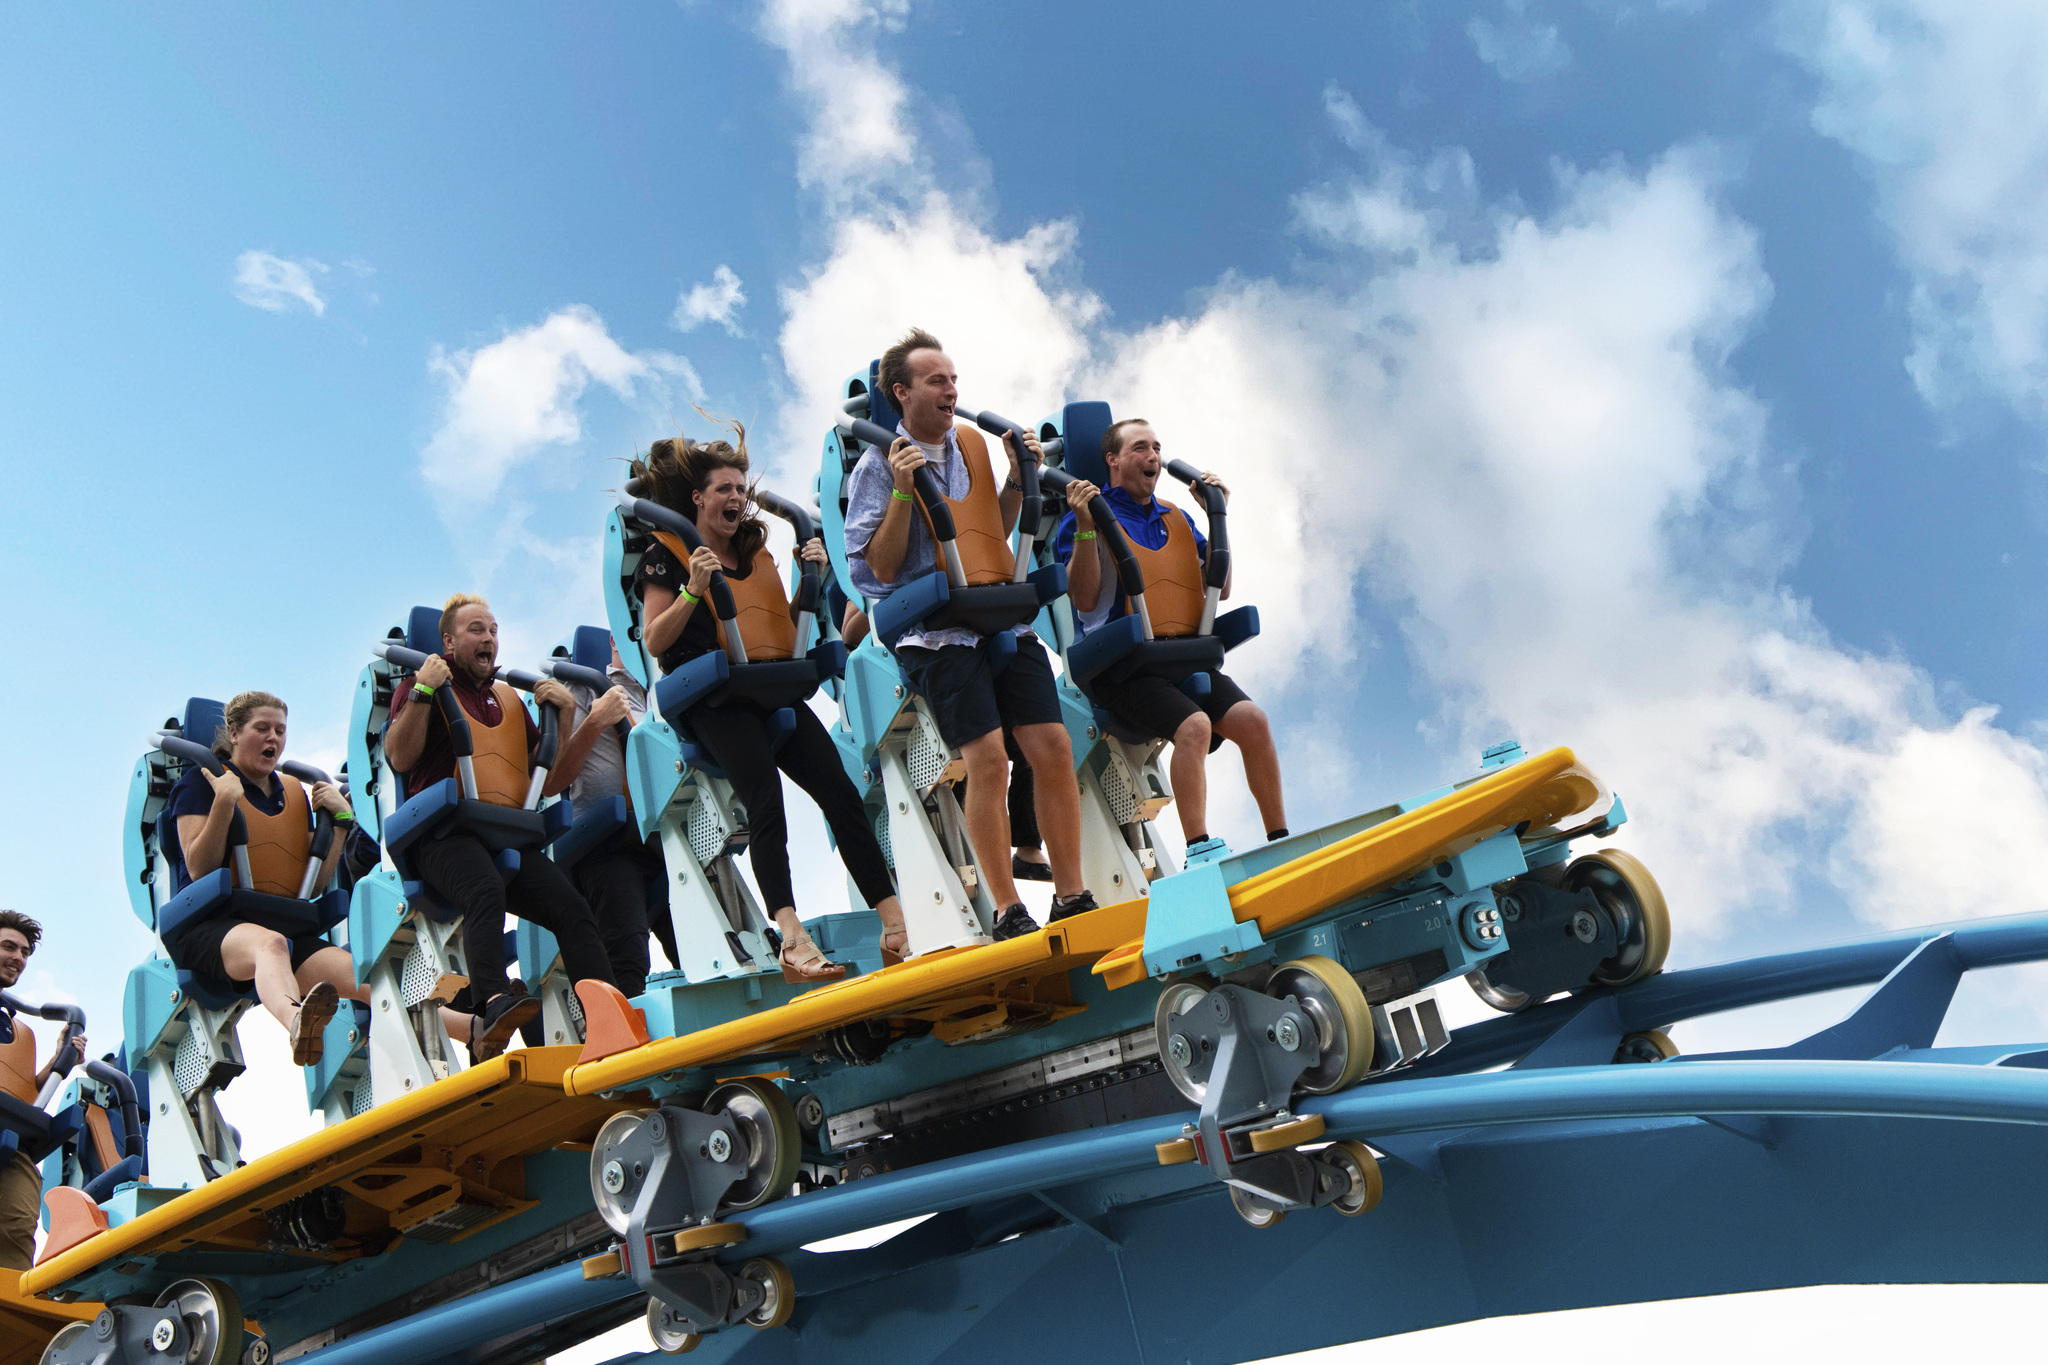 SeaWorld Orlando Announces First-Of-Its-Kind Roller Coaster, “Pipeline: The  Surf Coaster” — Park Paradise